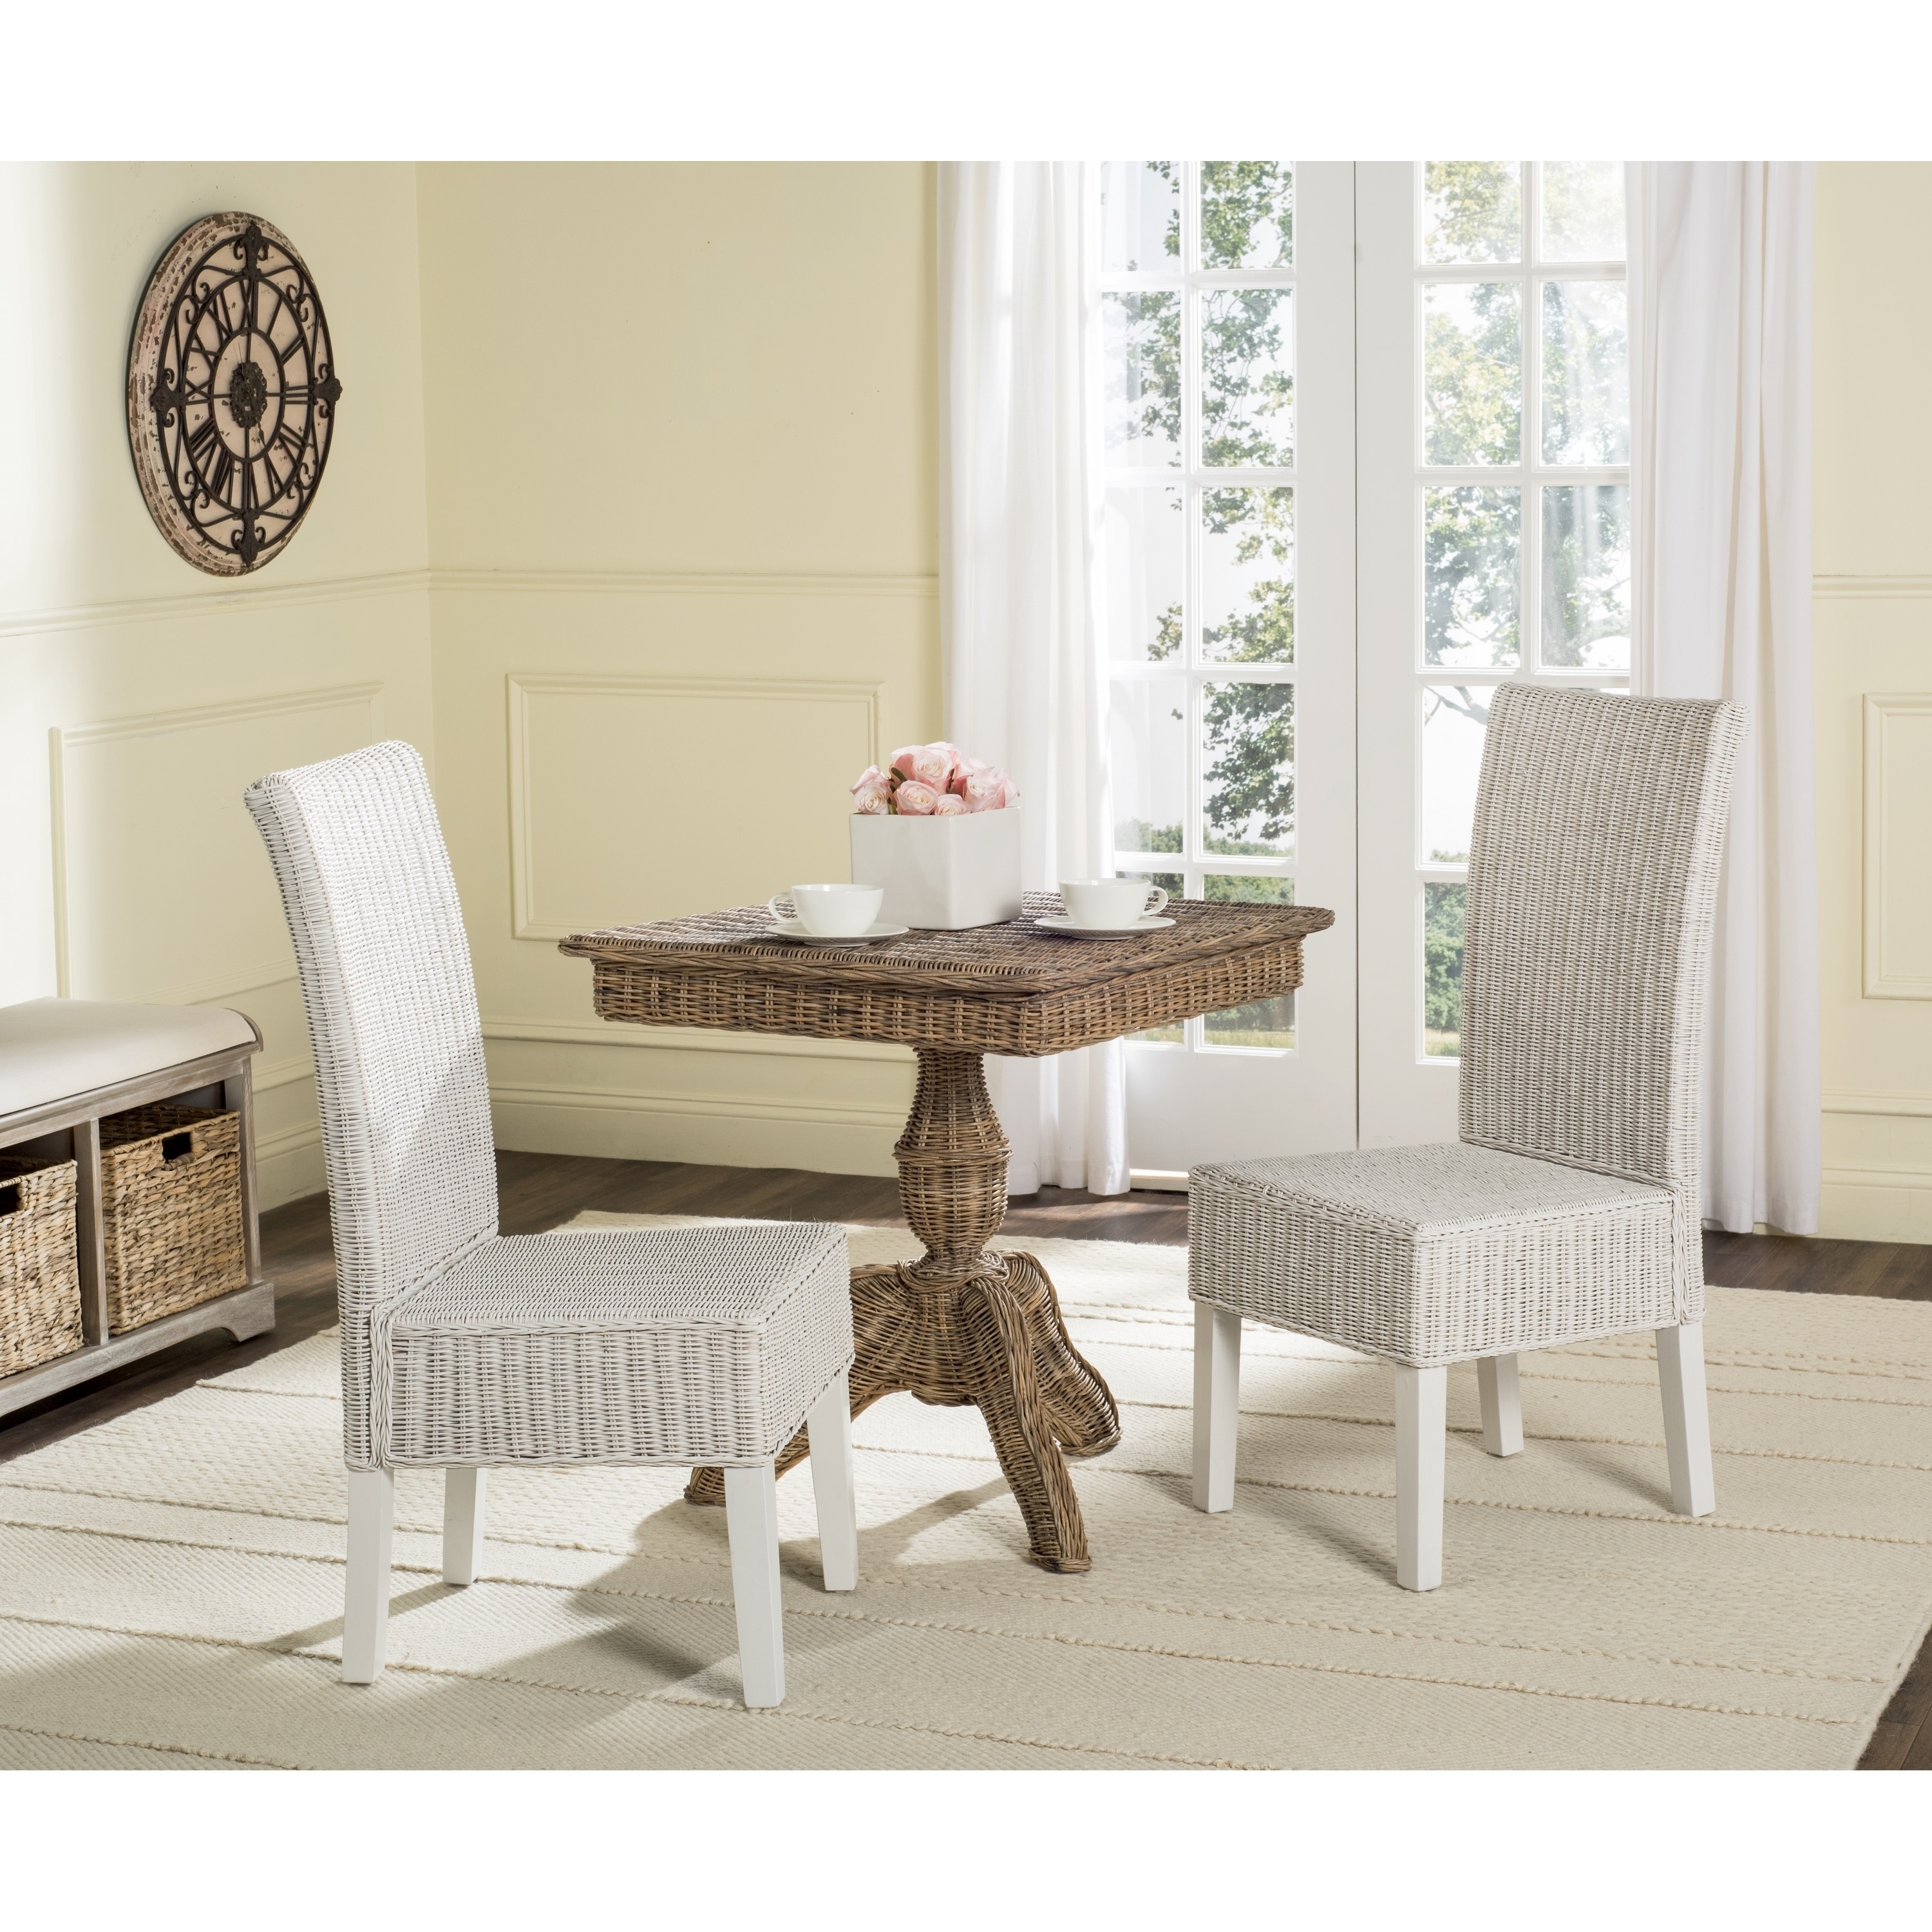 Safavieh Dining Rural Woven Arjun White Wicker Dining Chairs Set Of 2 Overstock 10906764